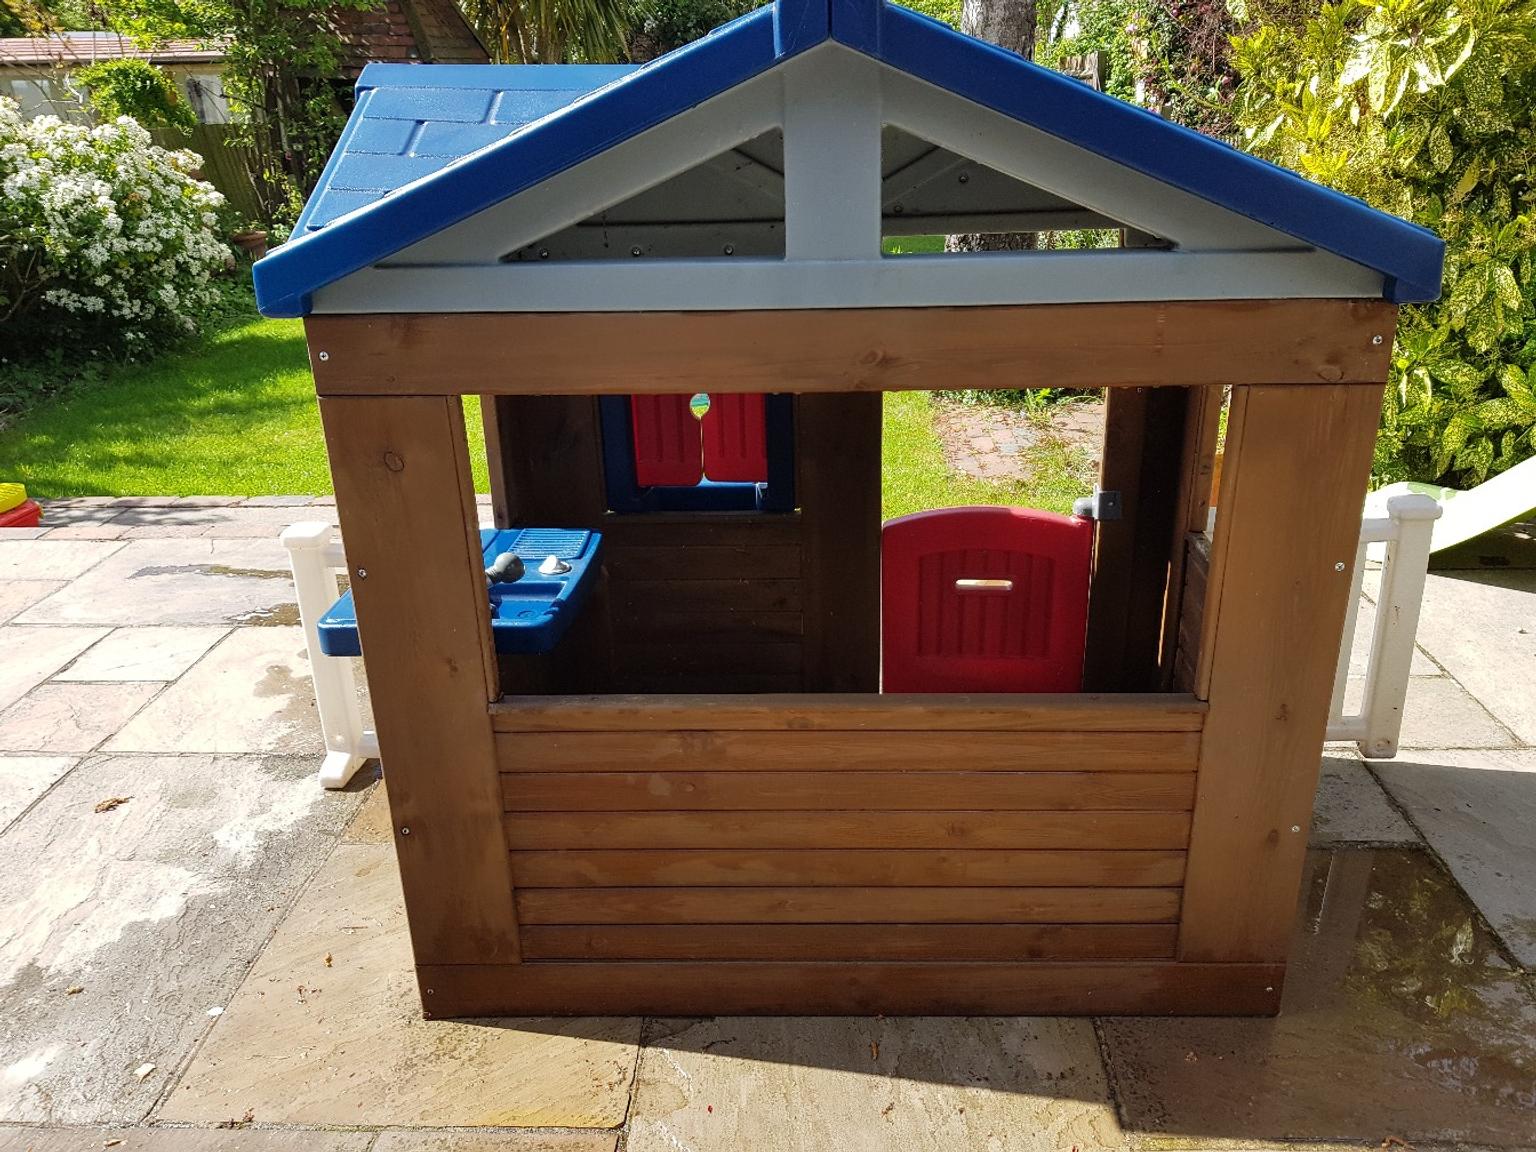 Little Tikes Wooden Playhouse In Br4 Bromley For 50 00 For Sale